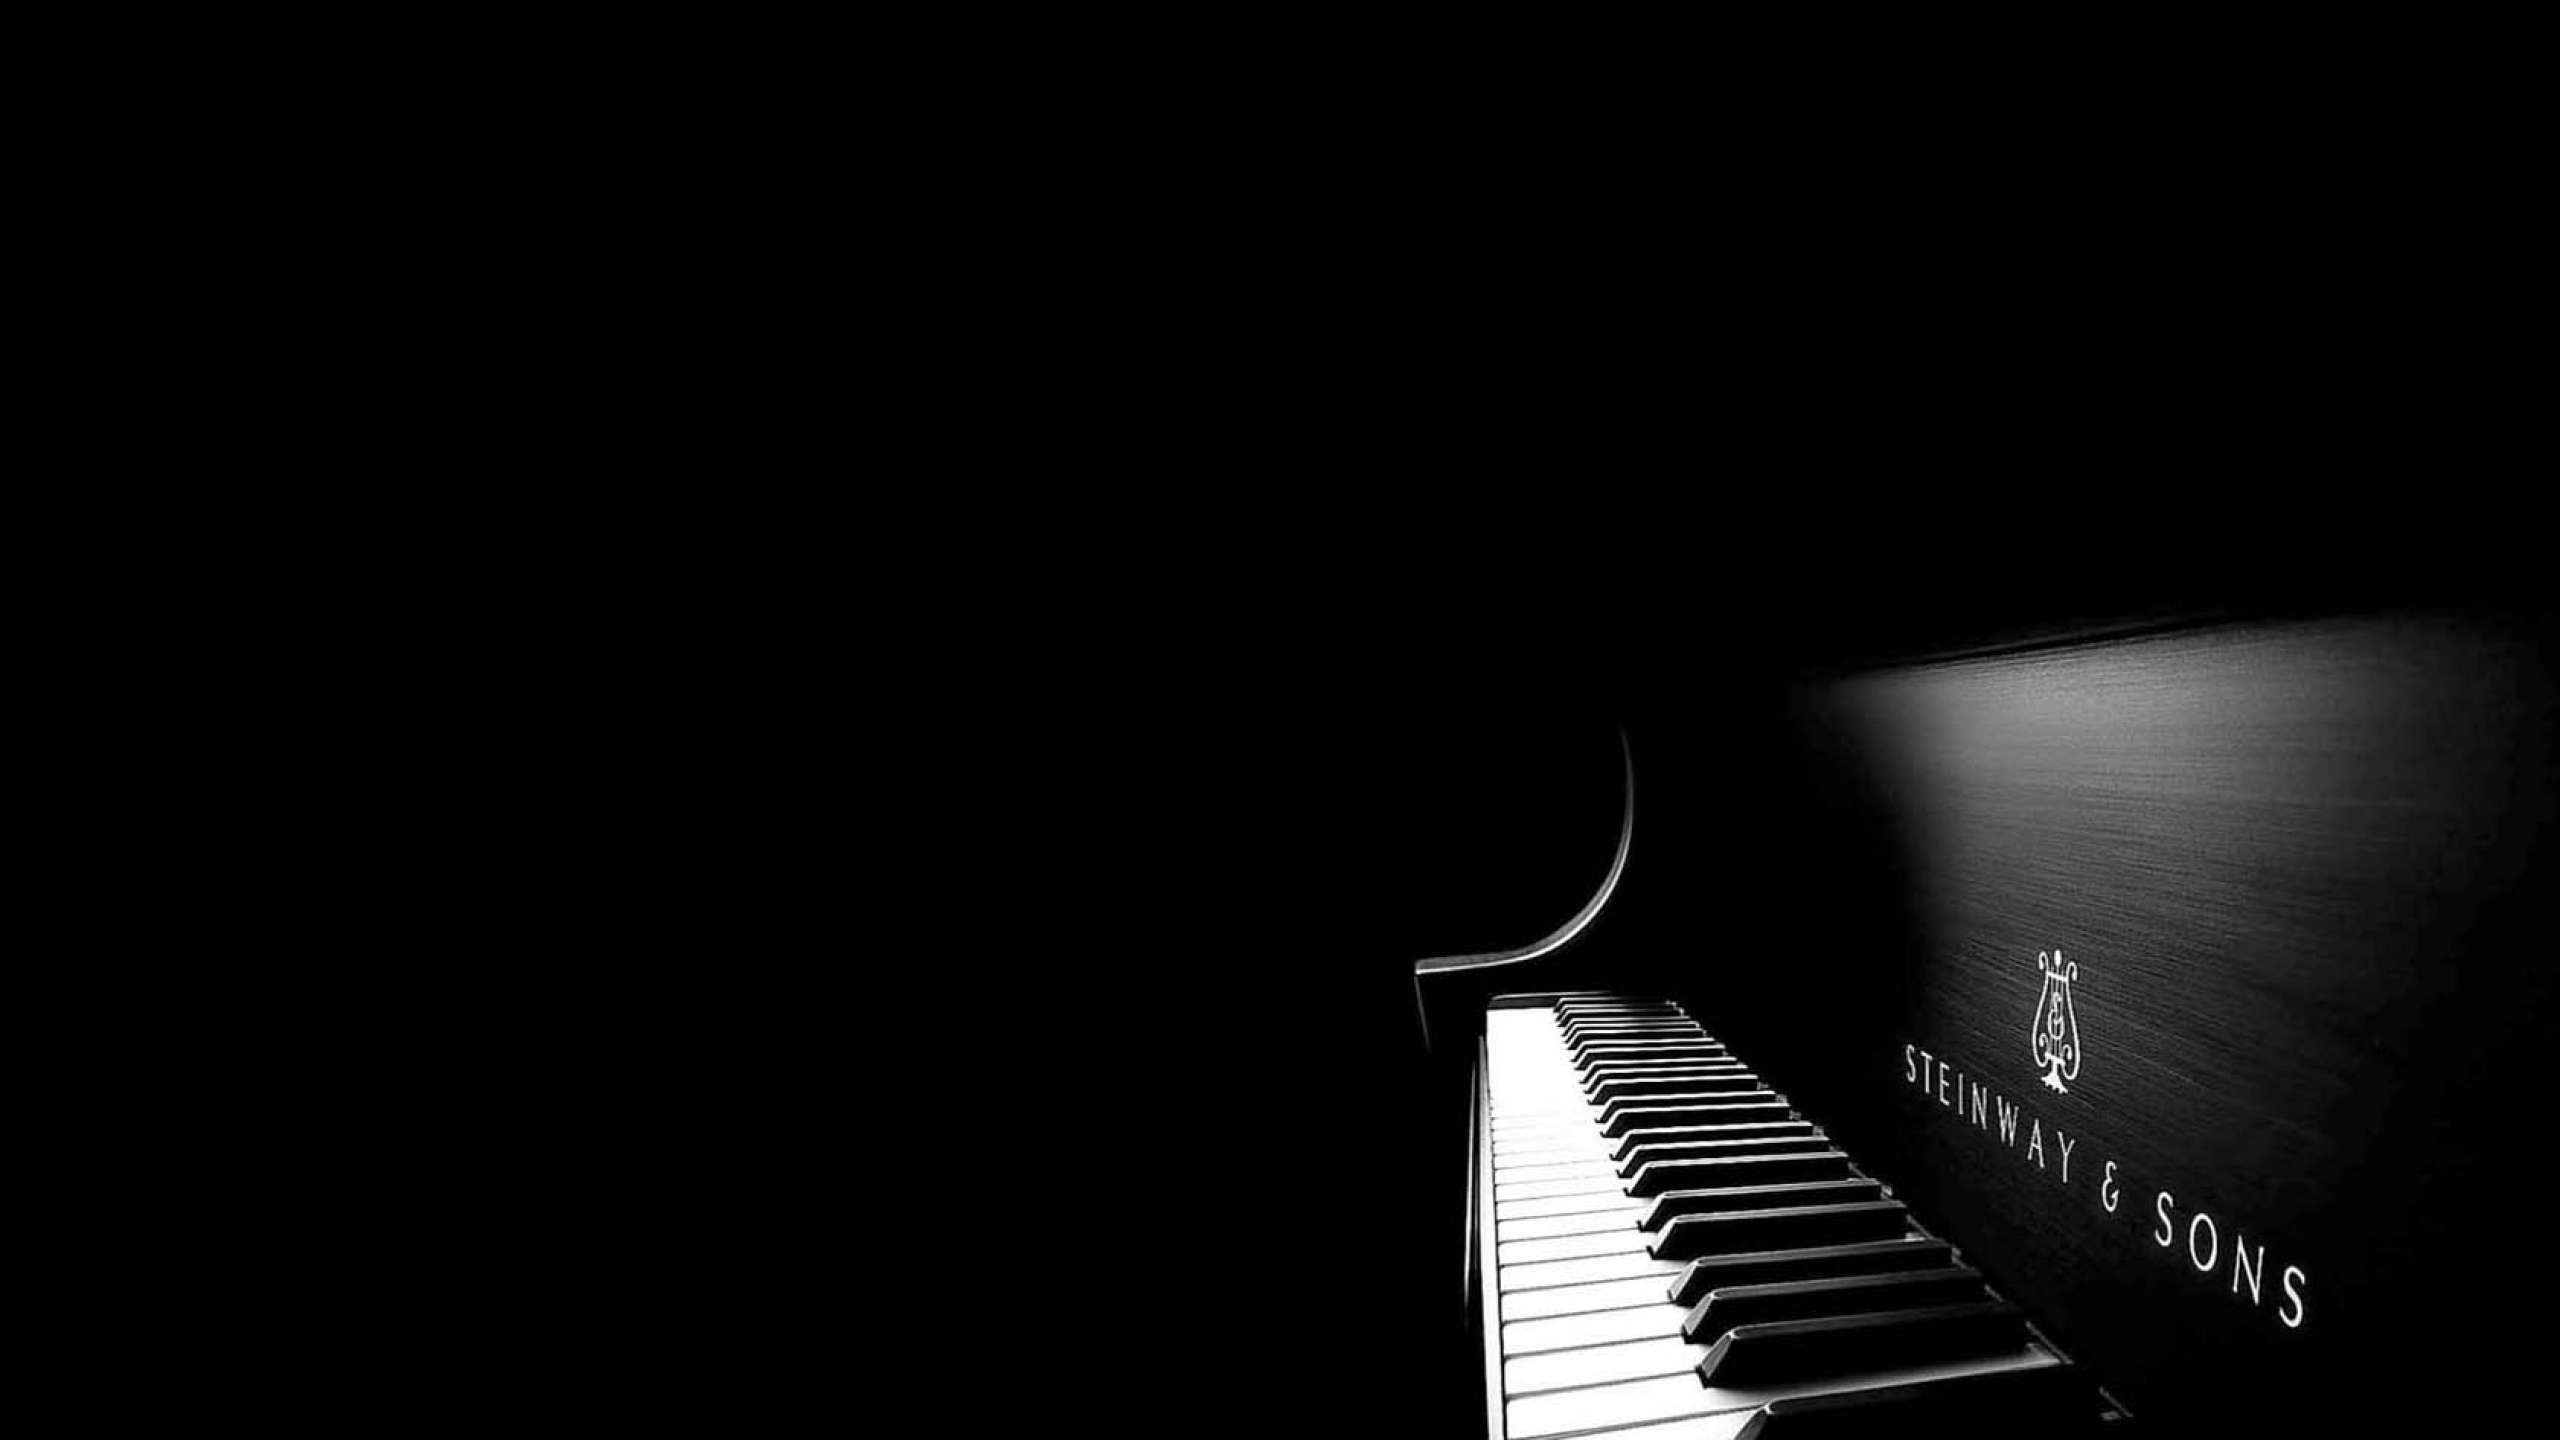 Music Piano Black White Classy wallpapers for your iMac